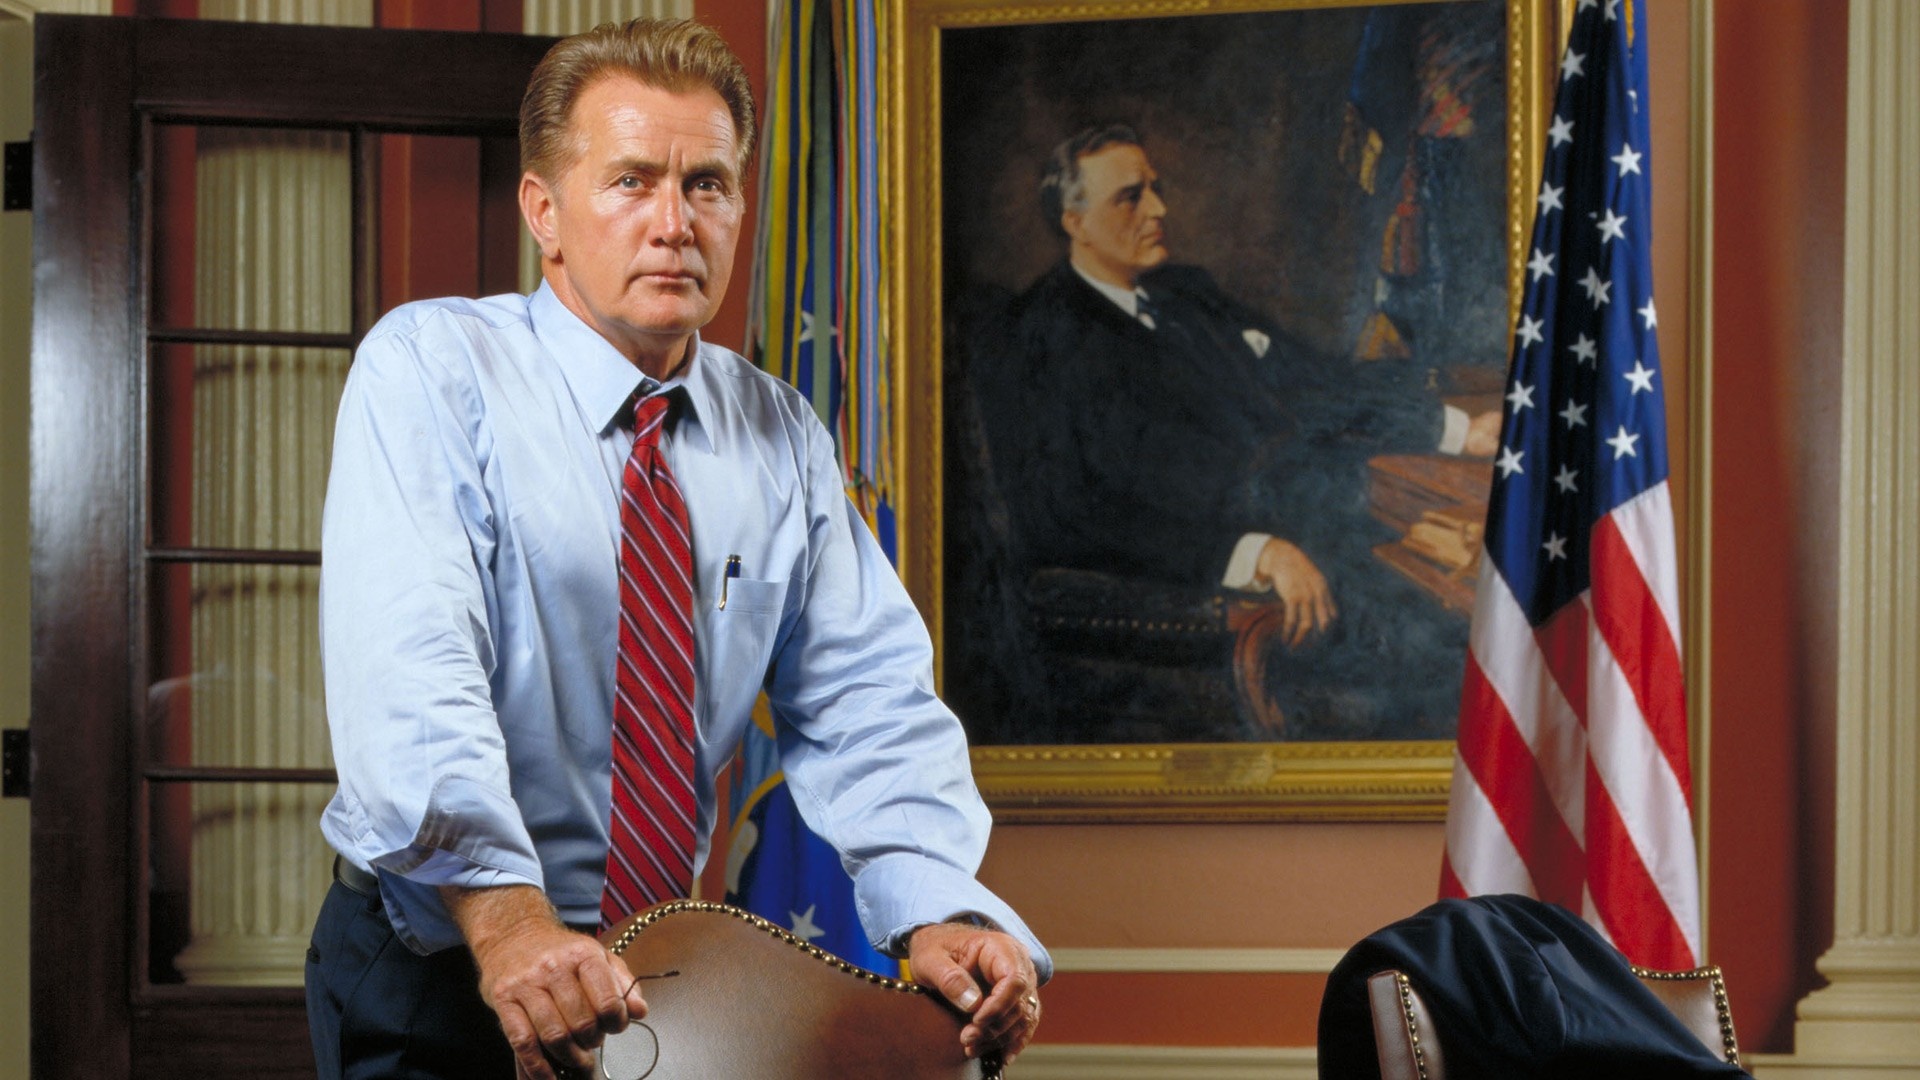 The West Wing (TV Series): Martin Sheen as Josiah Edward Bartlet, A former President of the United States. 1920x1080 Full HD Wallpaper.